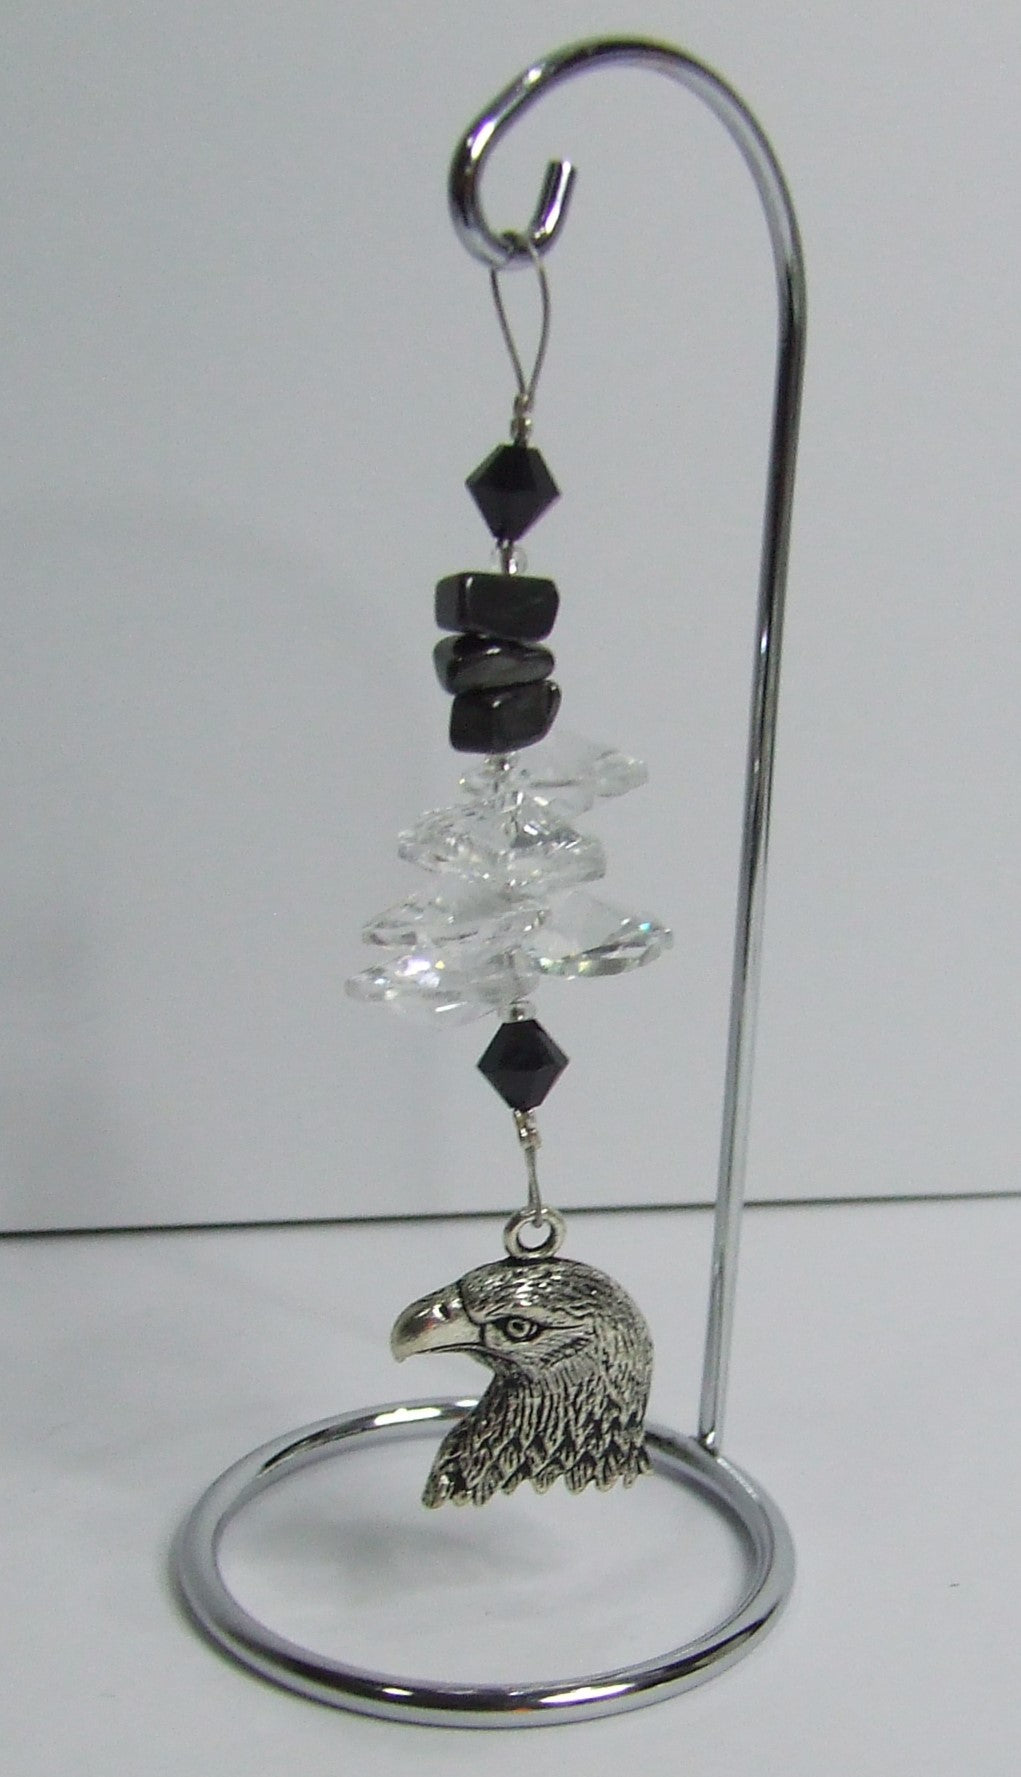 Eagle - black crystal suncatcher is decorated with hematite gemstones and come on this amazing small stand.